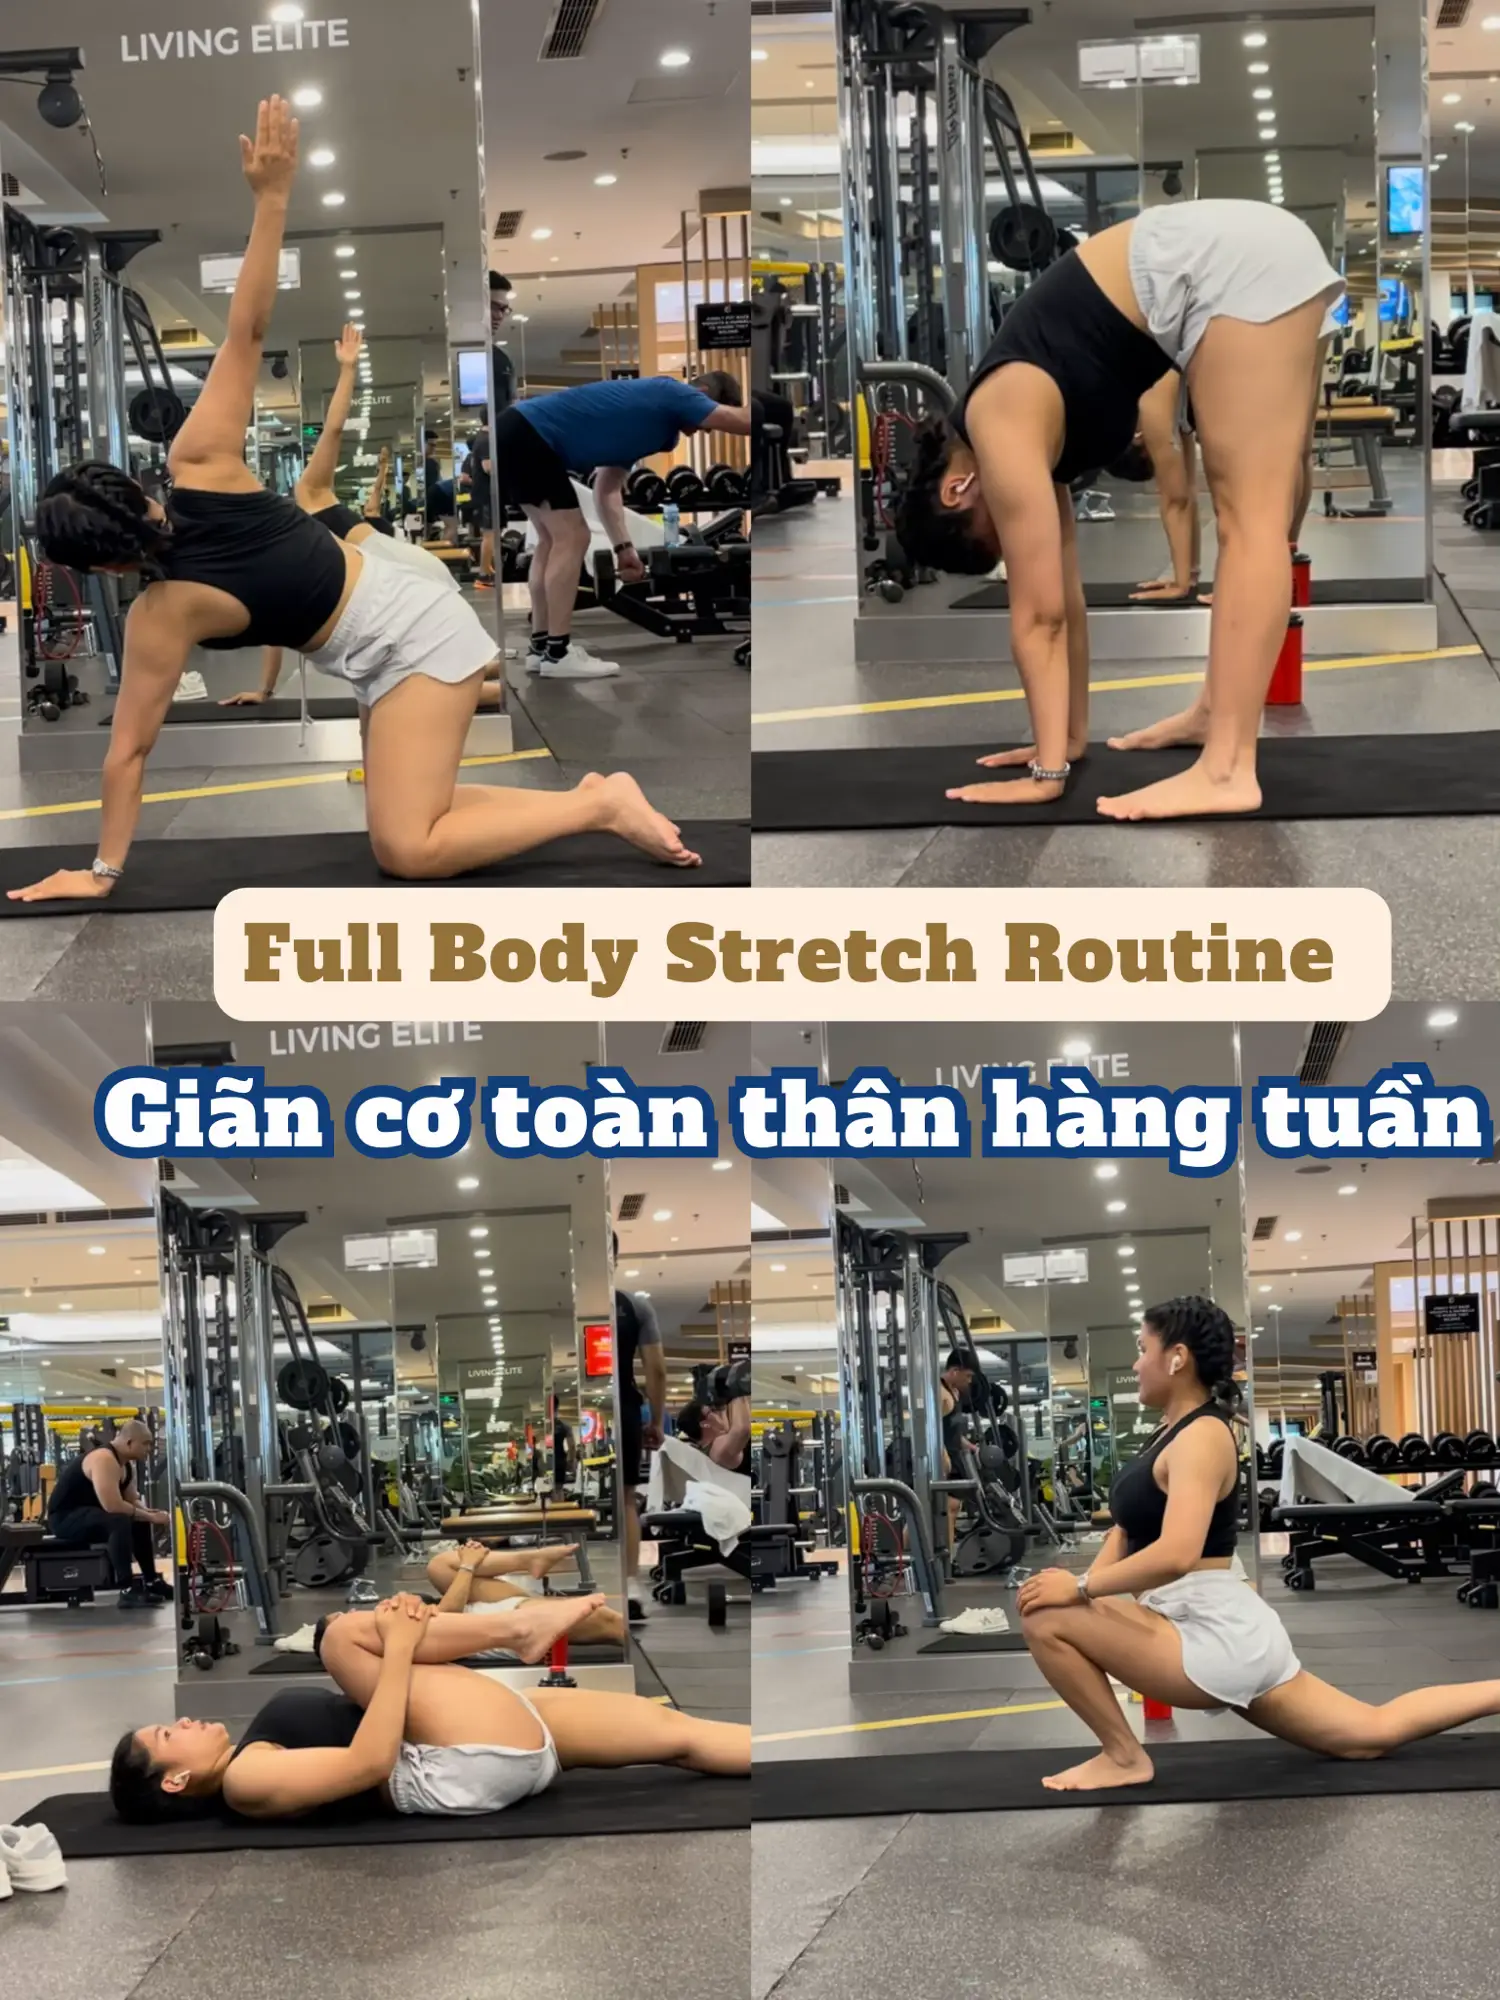 Full Body Stretch, Gentle Routine for Flexibility, Relaxation & Stress  Relief